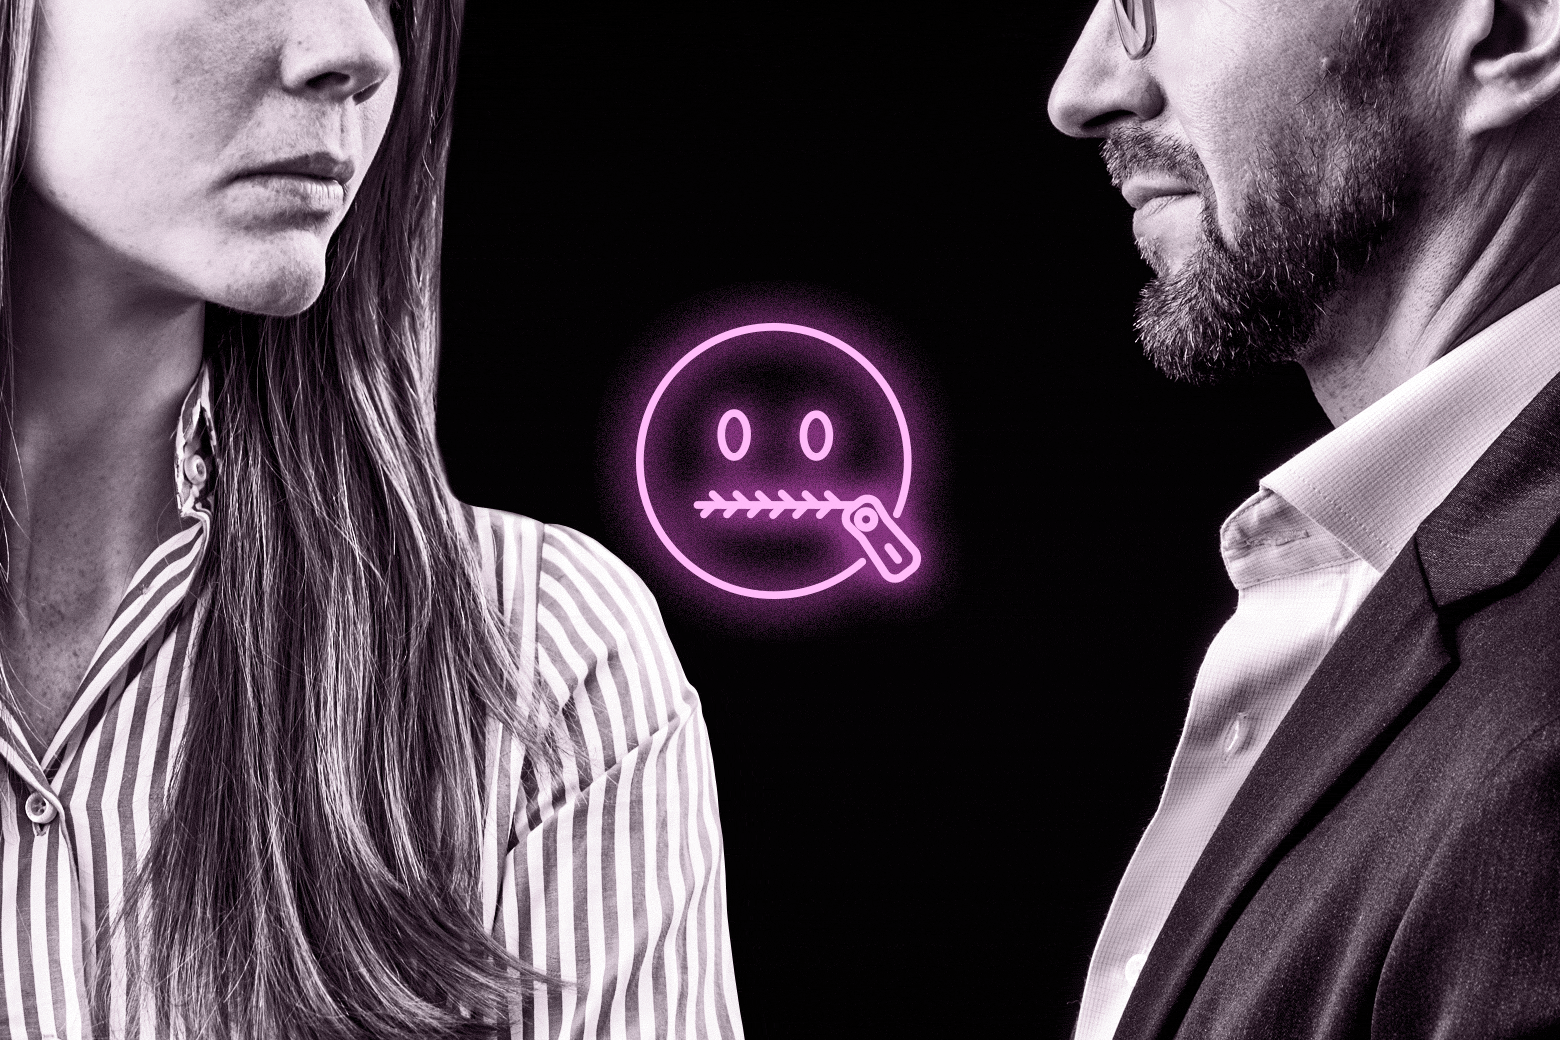 Collage of a young woman on the left looking over to an older man with a beard to the right and in between them a neon emoji with a zipper mouth.